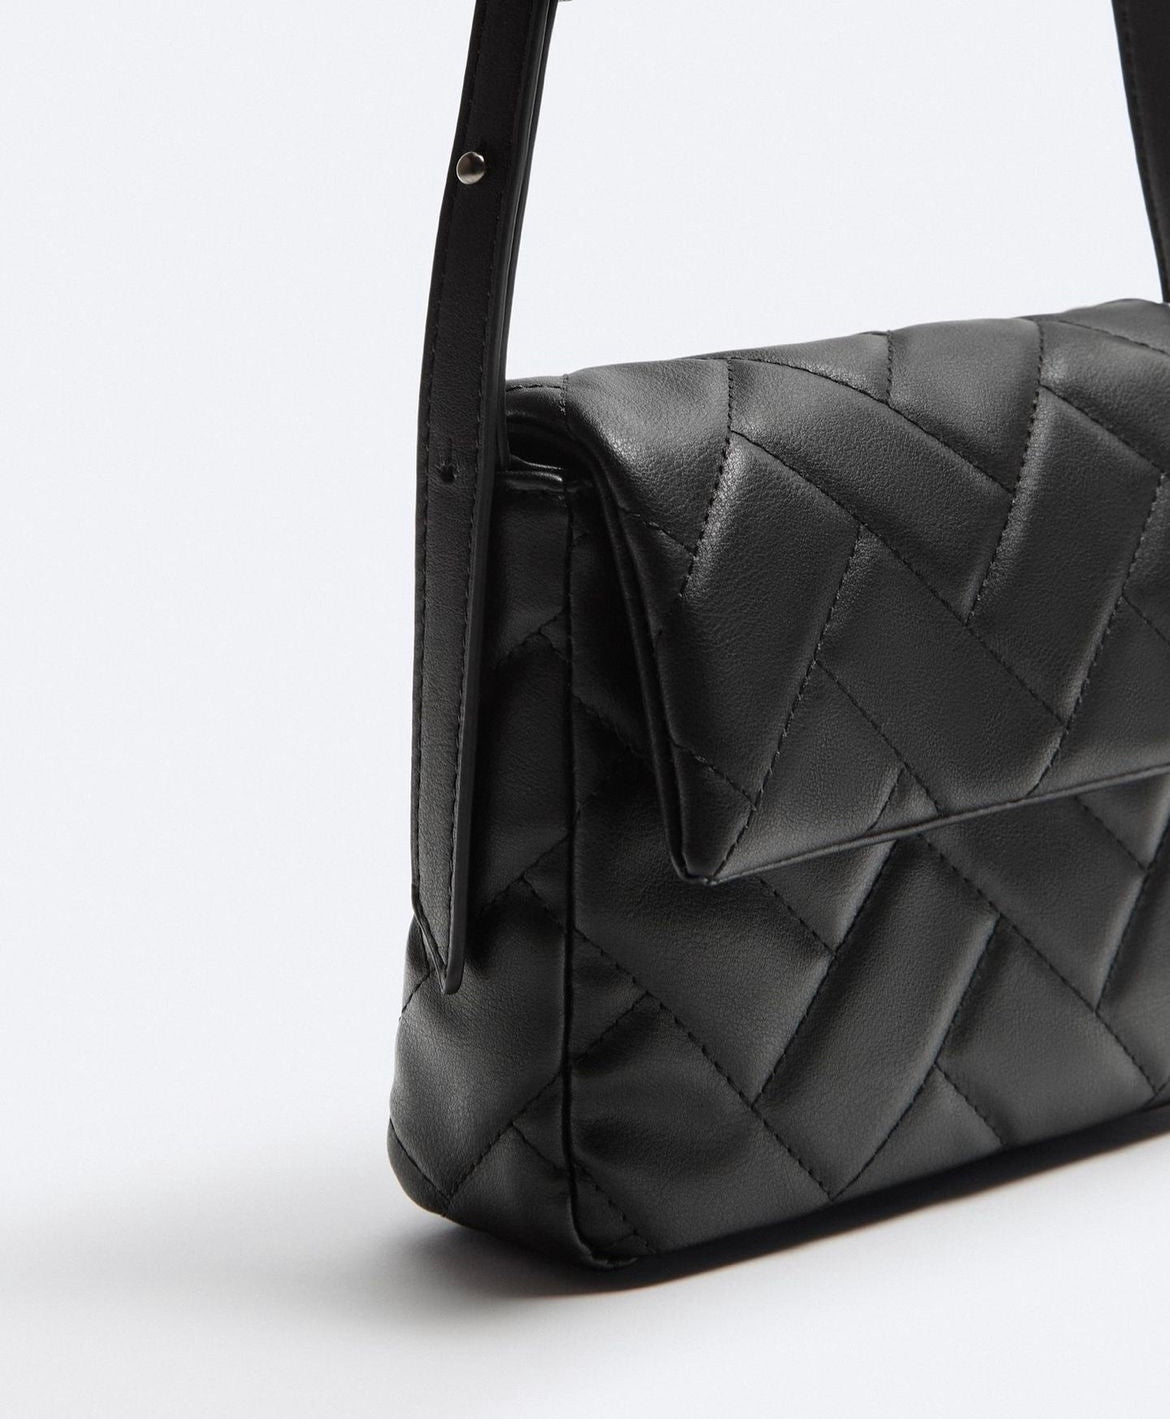 Zara quilted crossbody bag with flap